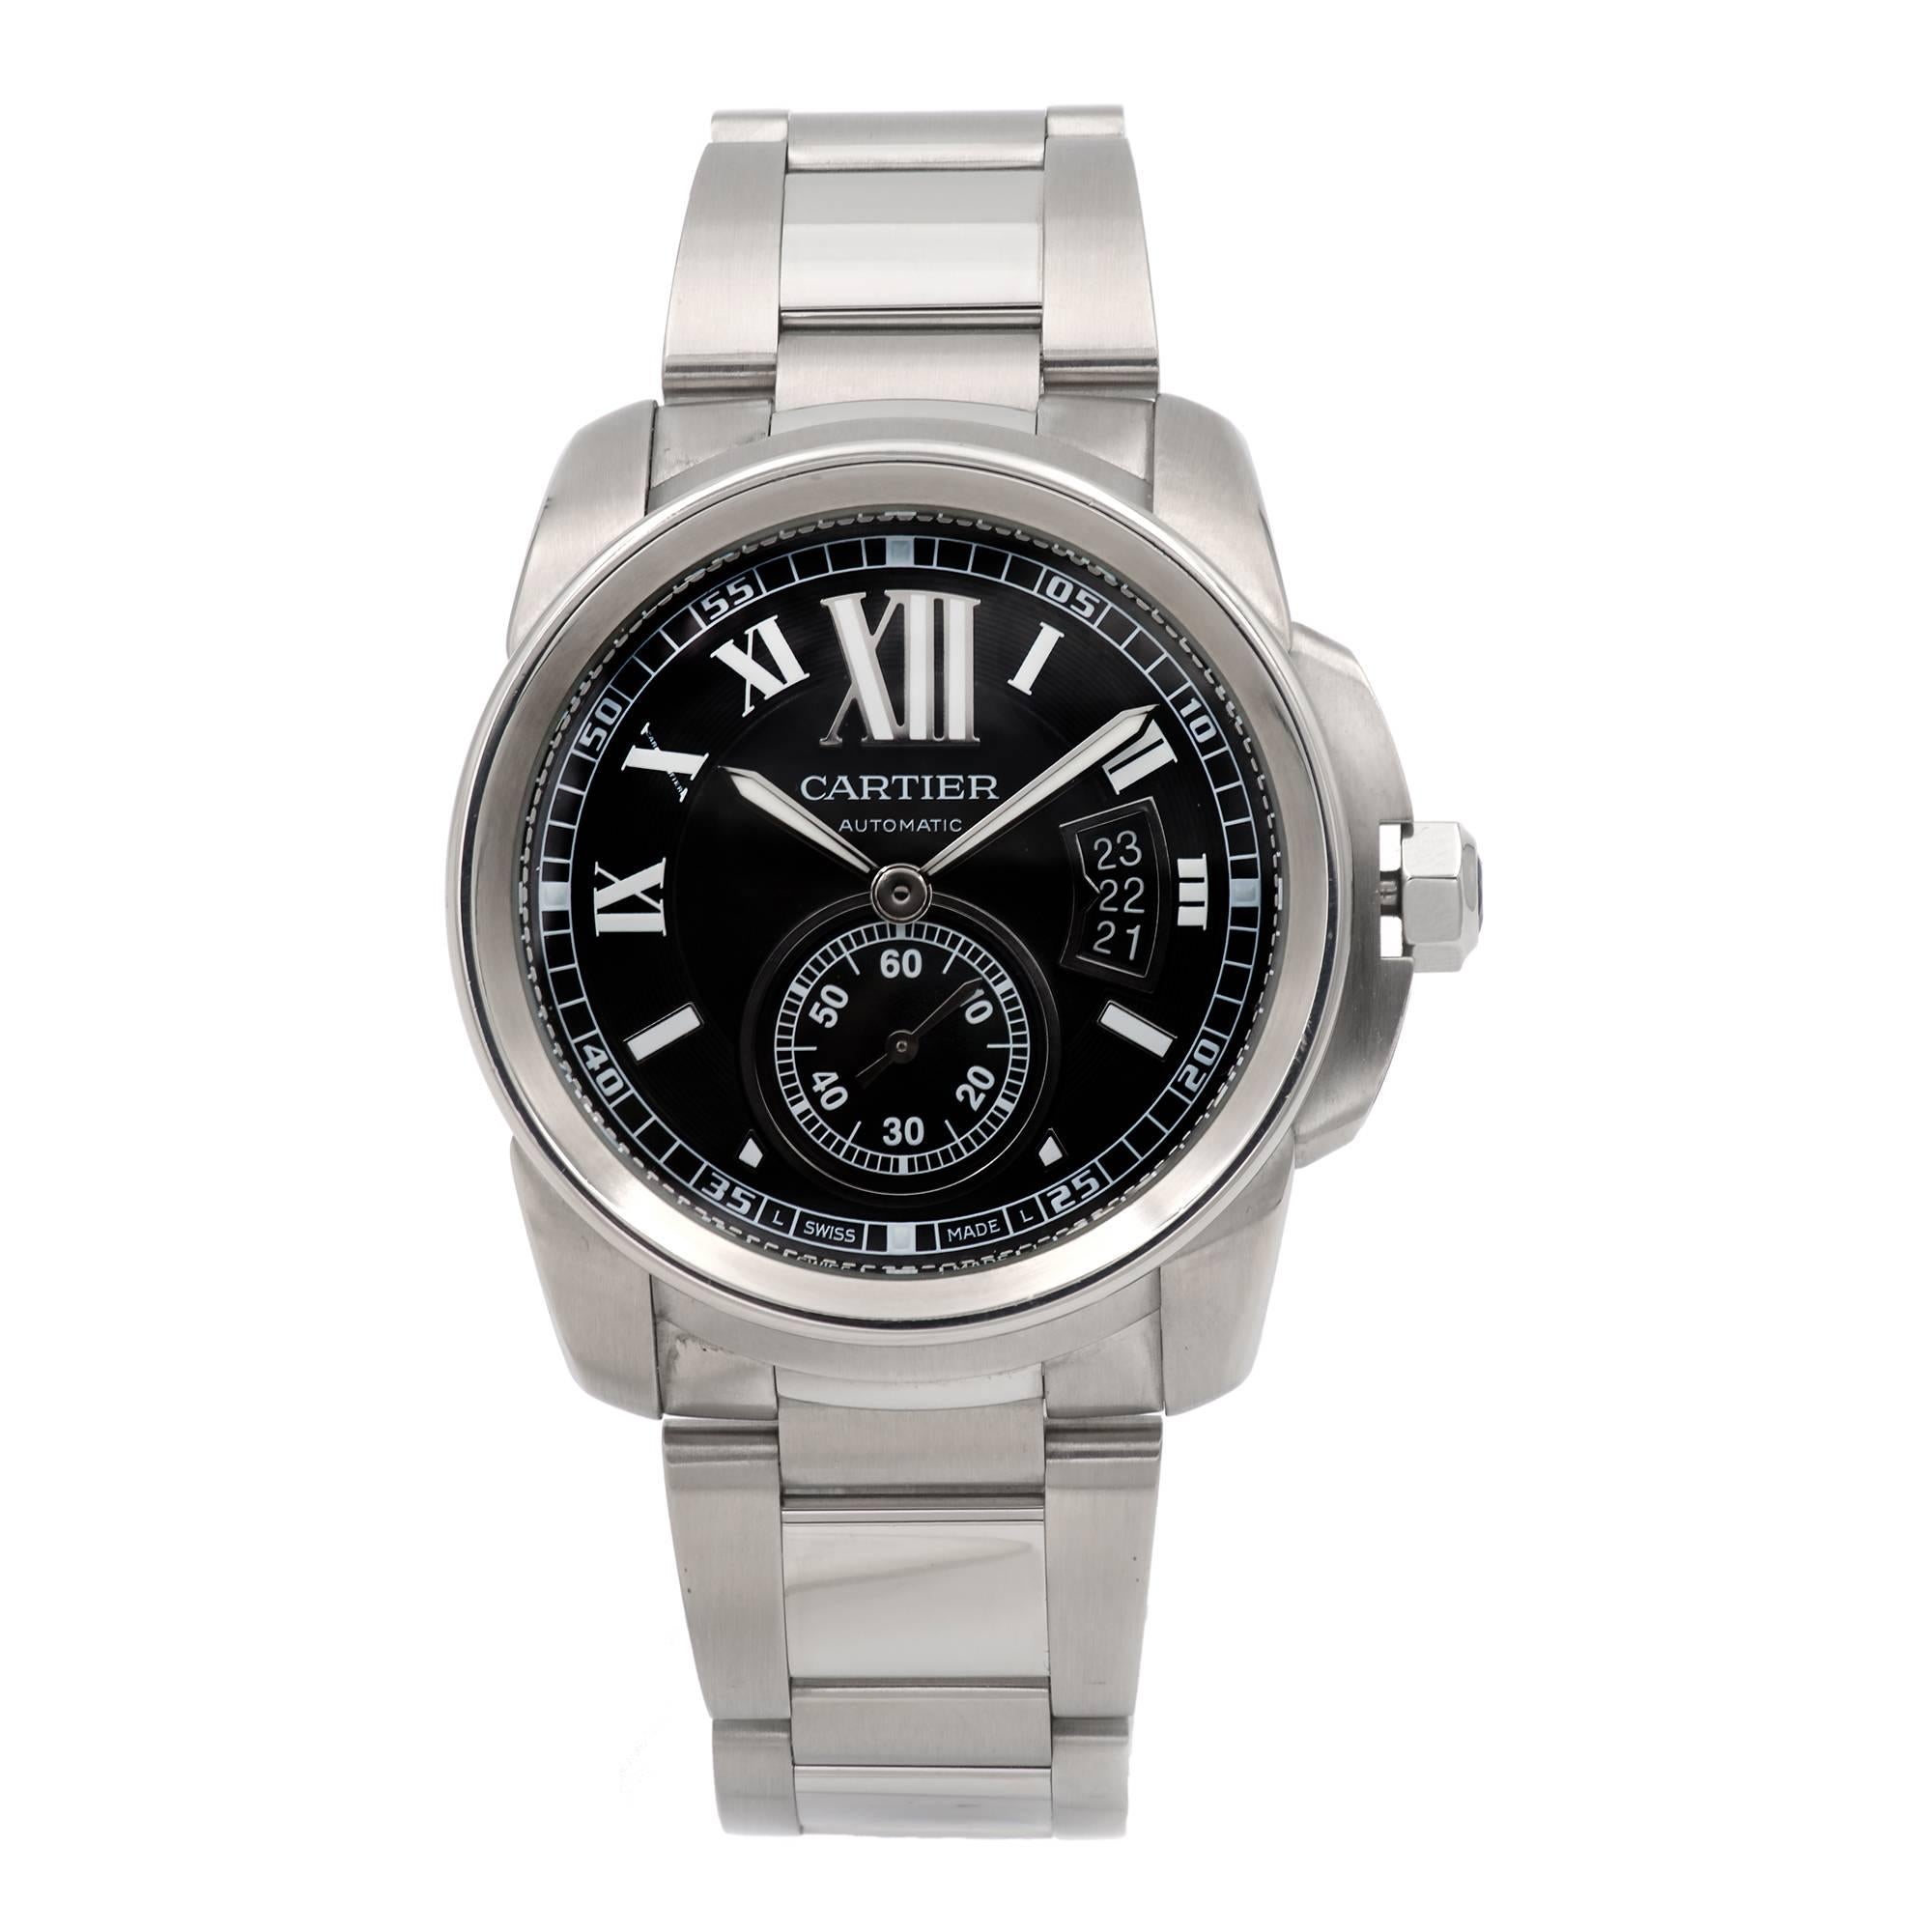 Calibre de Cartier Automatic stainless steel watch with stainless steel band. All original with black dial.

Stainless Steel
Length: 48.5mm
Width: 44mm
Band width at case: 23mm
Case thickness: 9.75mm
Band: Original steel Cartier
Crystal: